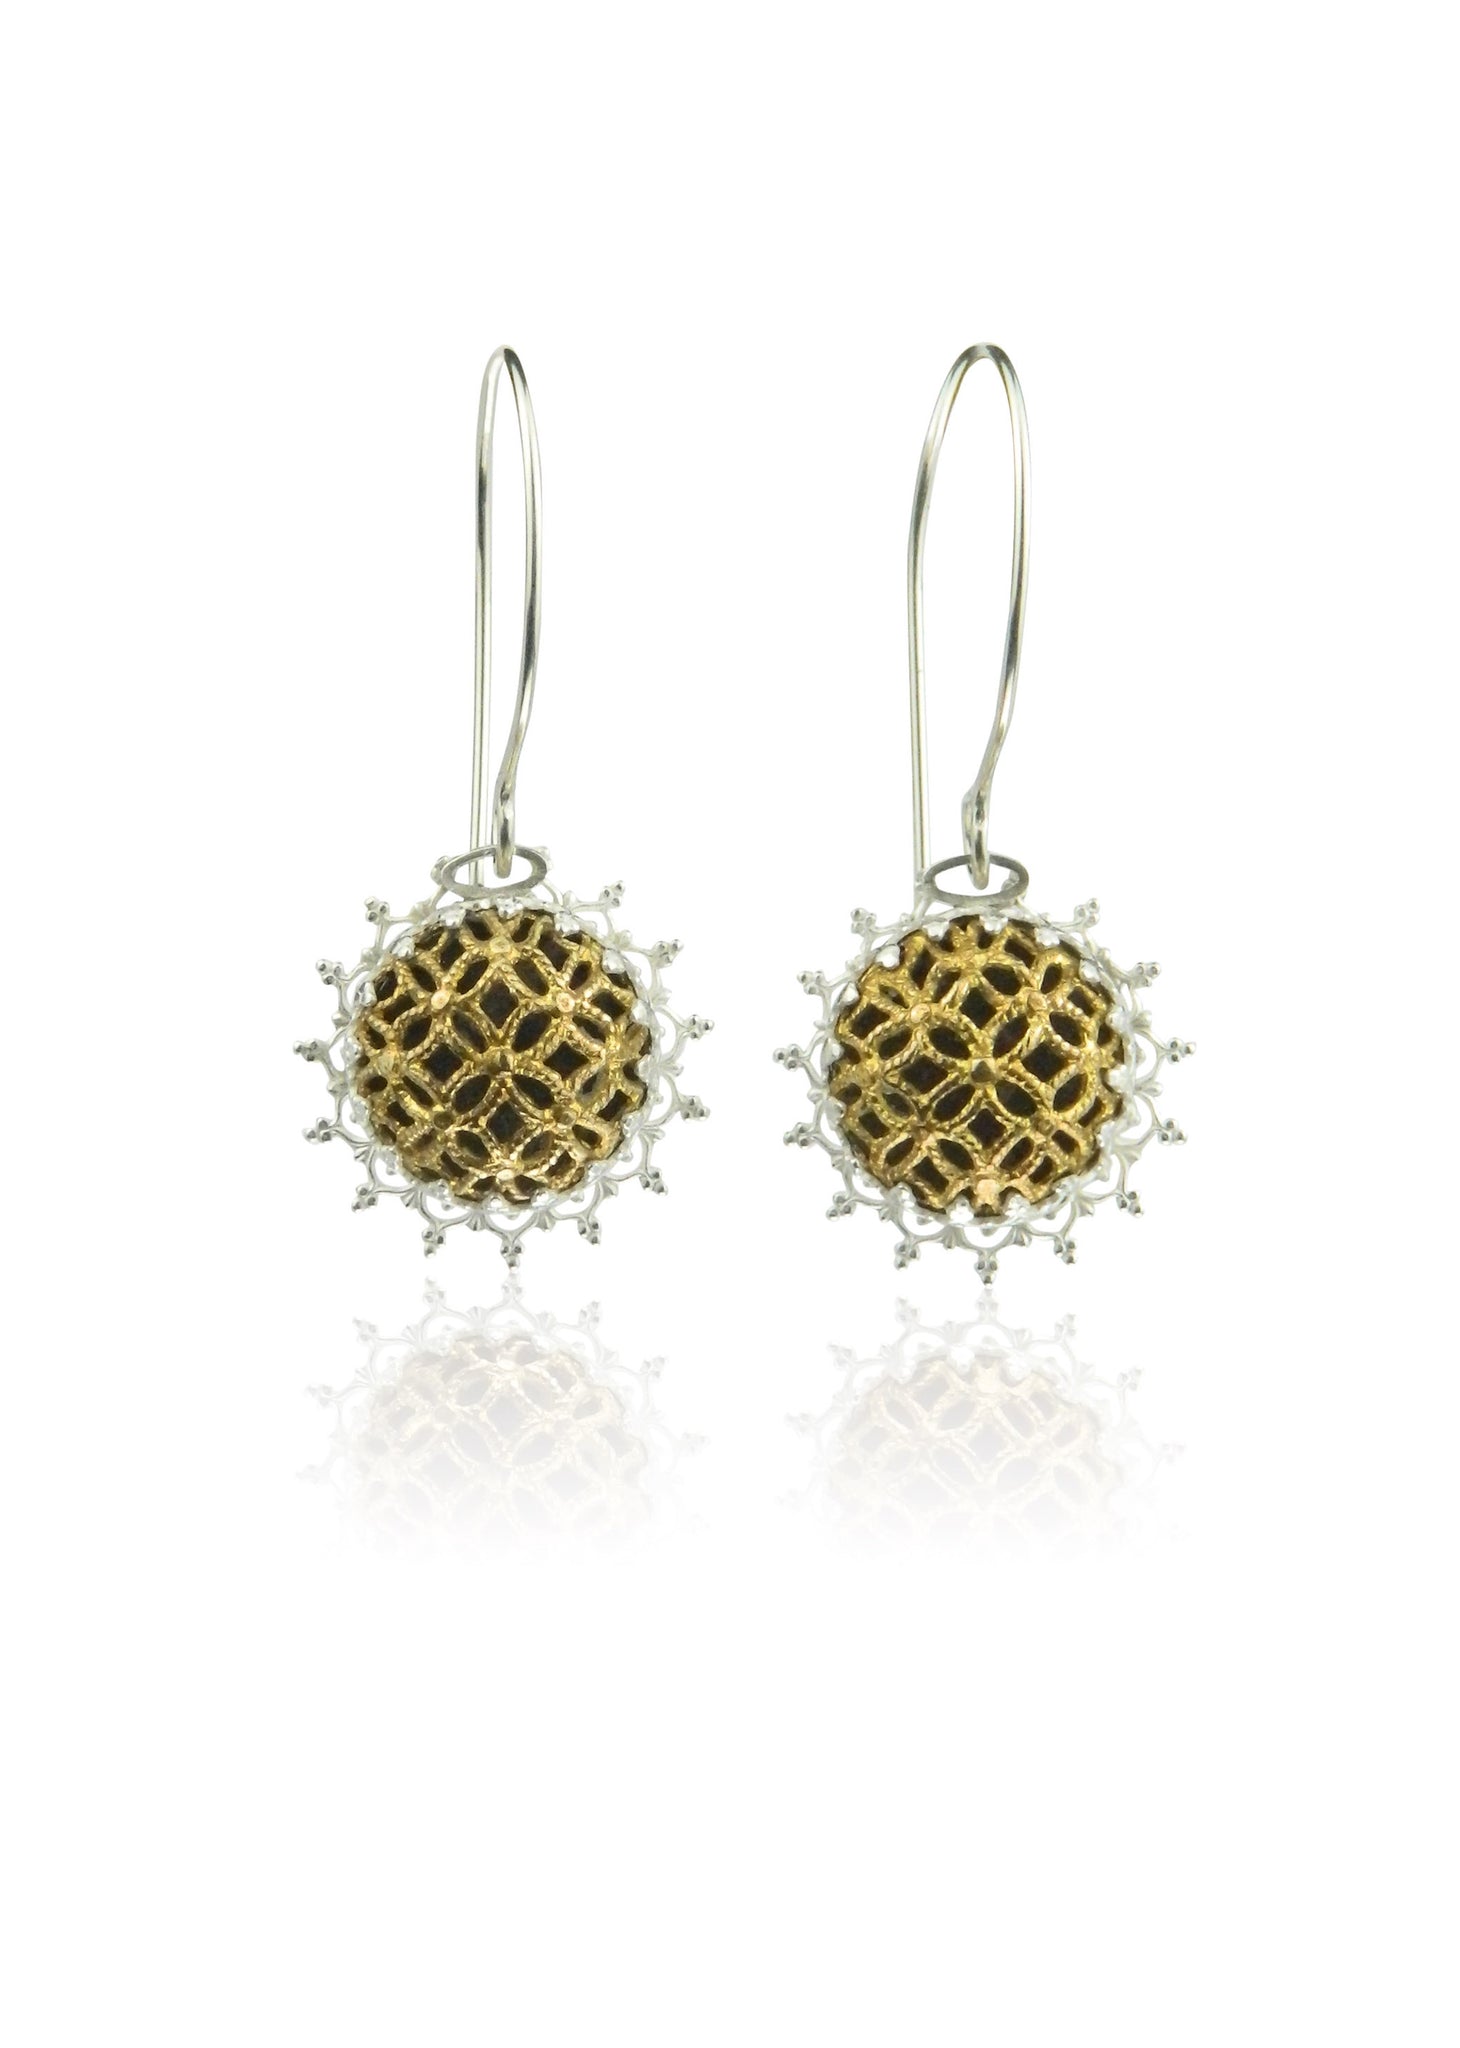 Filigree lace floral earrings